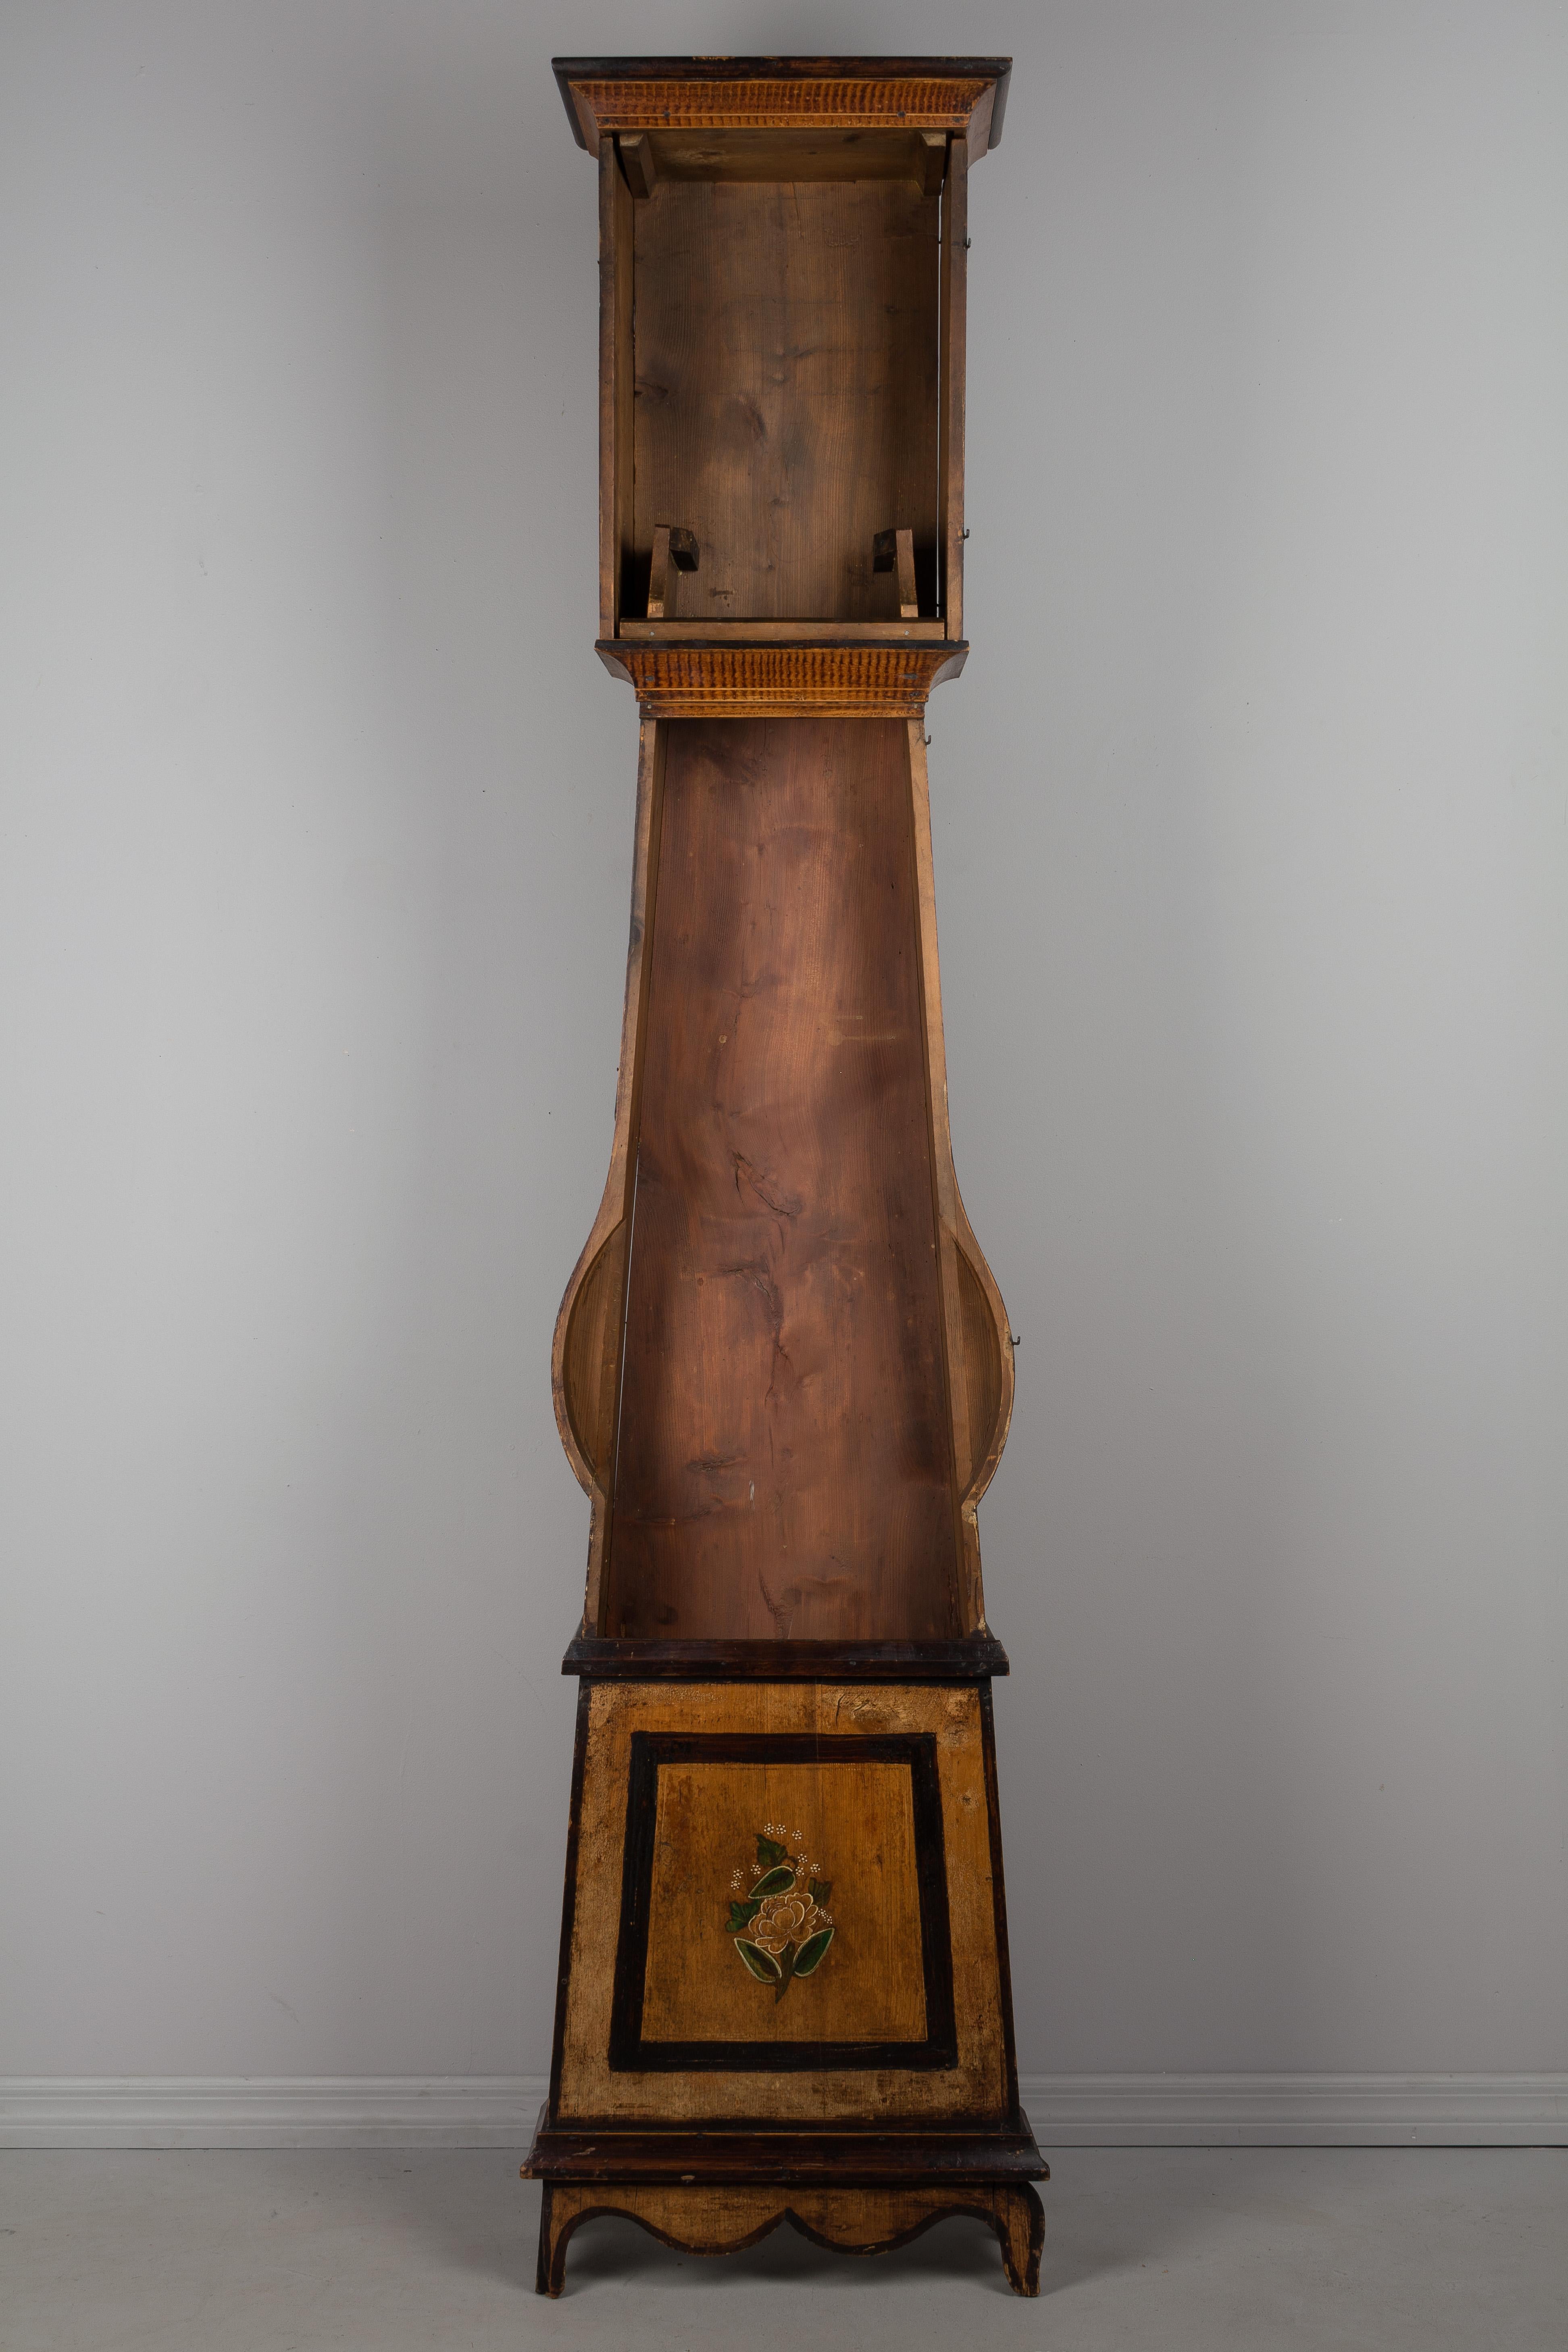 A French country comtoise, or grandfather clock, with polychrome painted pine case and embossed pendulum. Original seven day Morbier movement, professionally cleaned and in working order, having an enamel face signed by the clockmaker, Billot at La